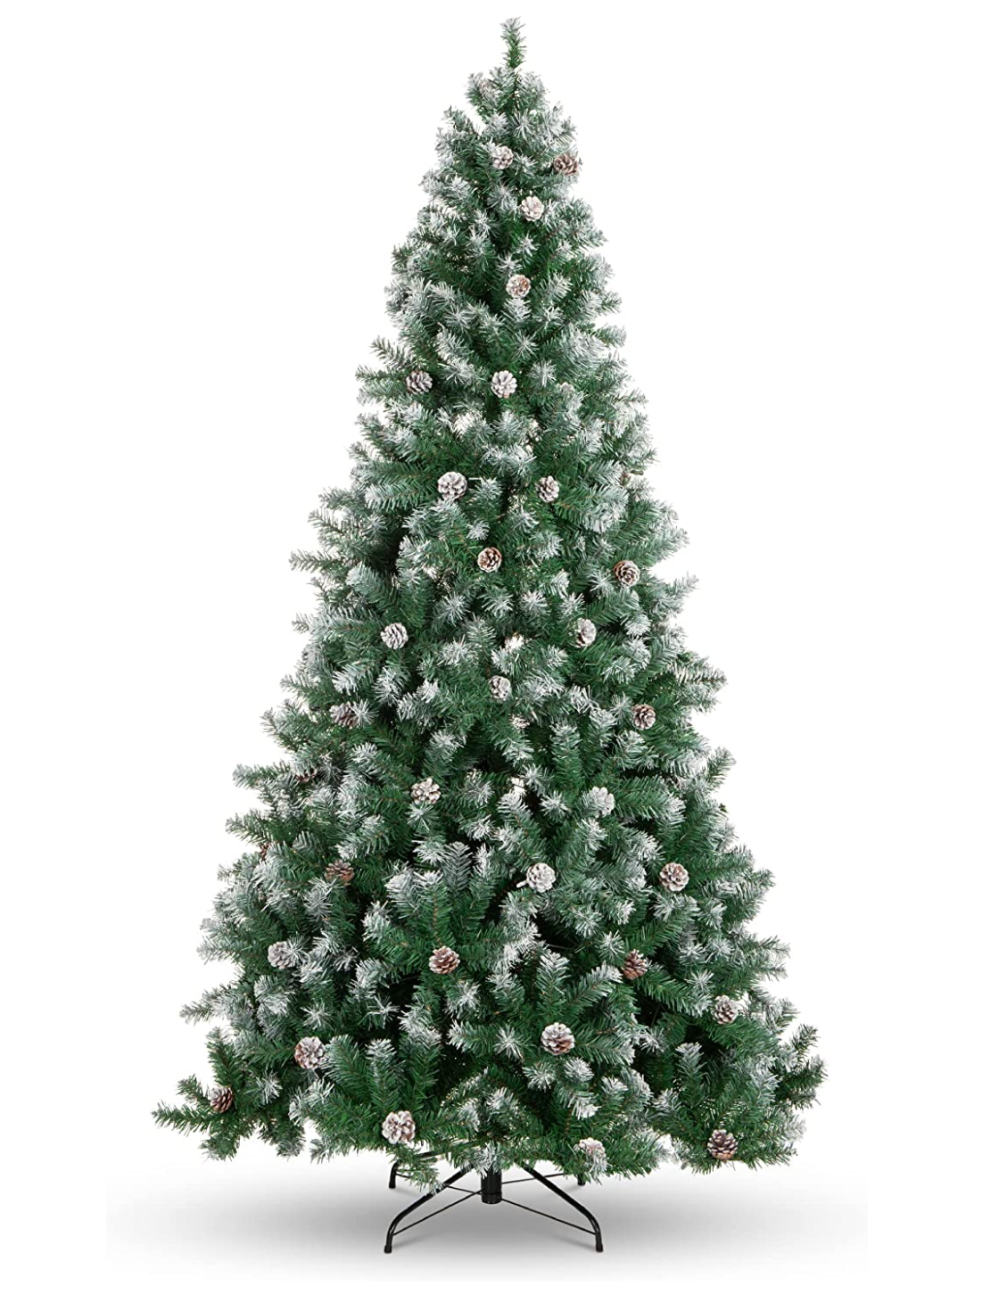 Best Choice Products 6ft Pre-Decorated Holiday Christmas Tree